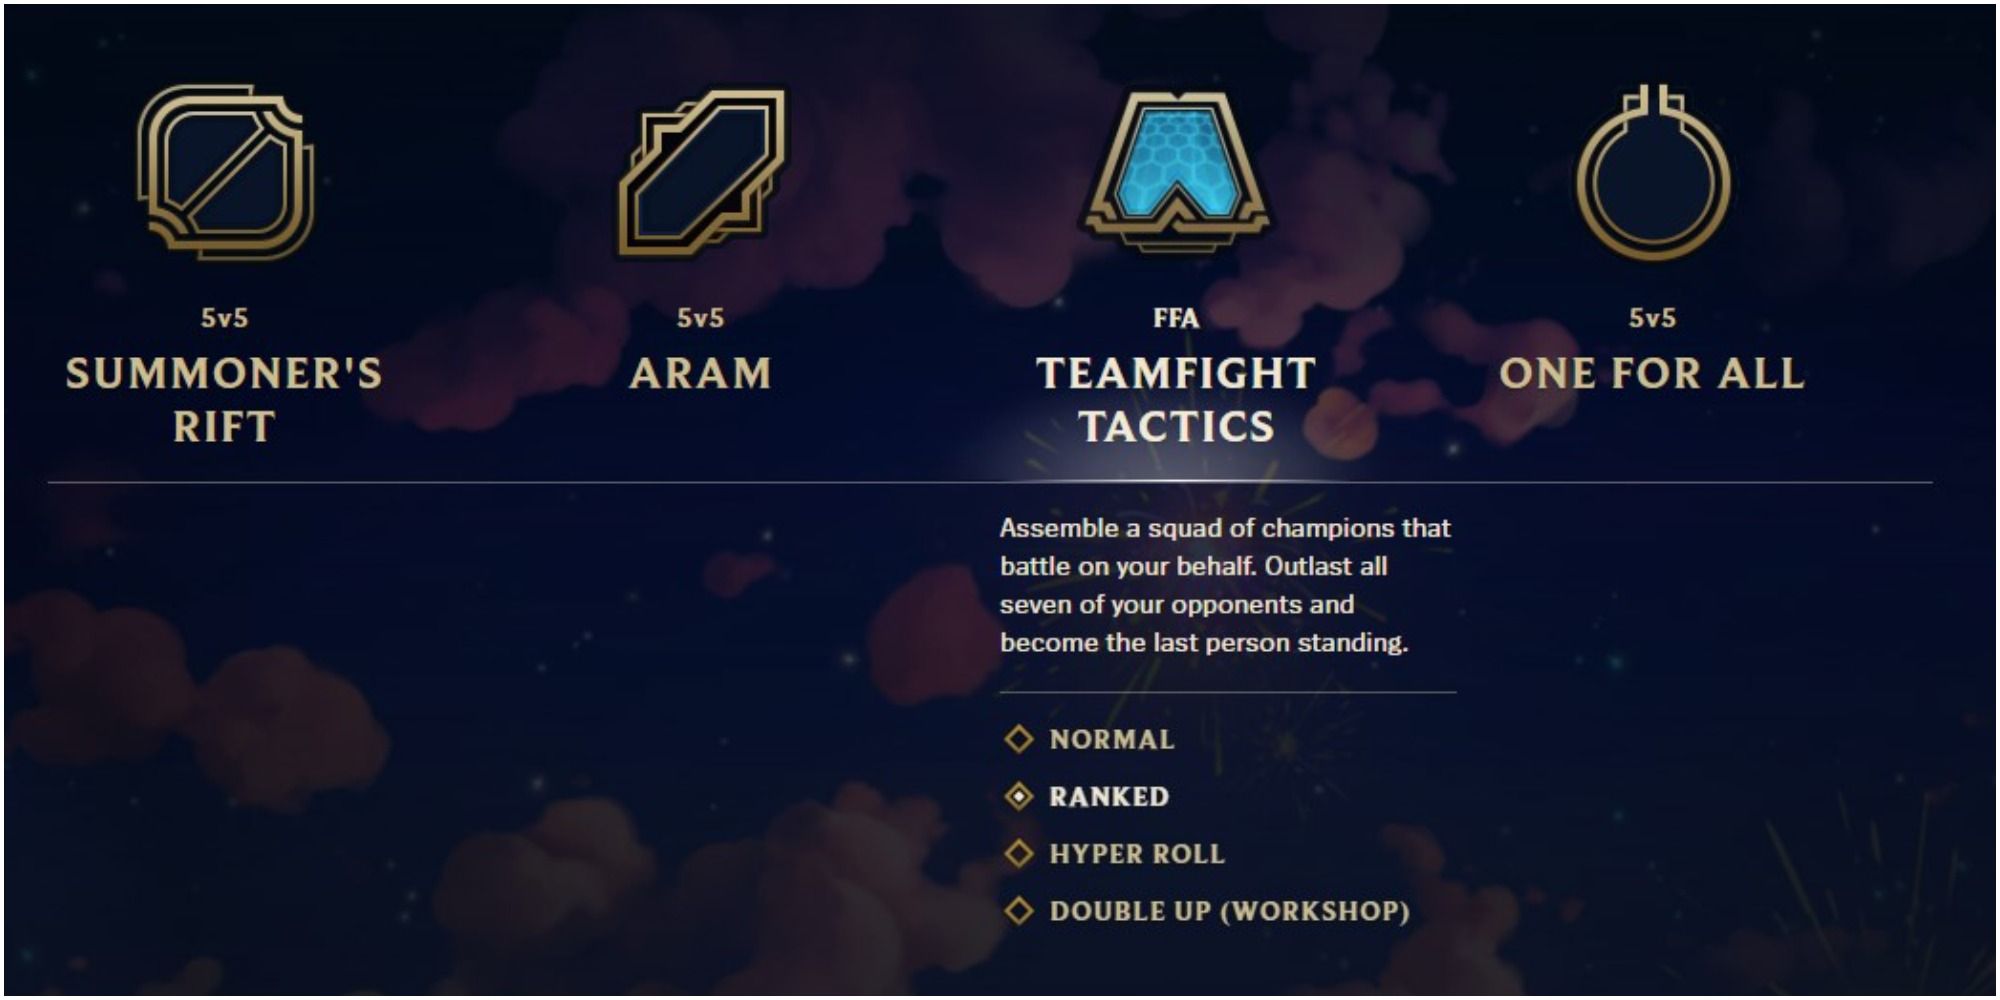 Teamfight Tactics Available Gamemodes